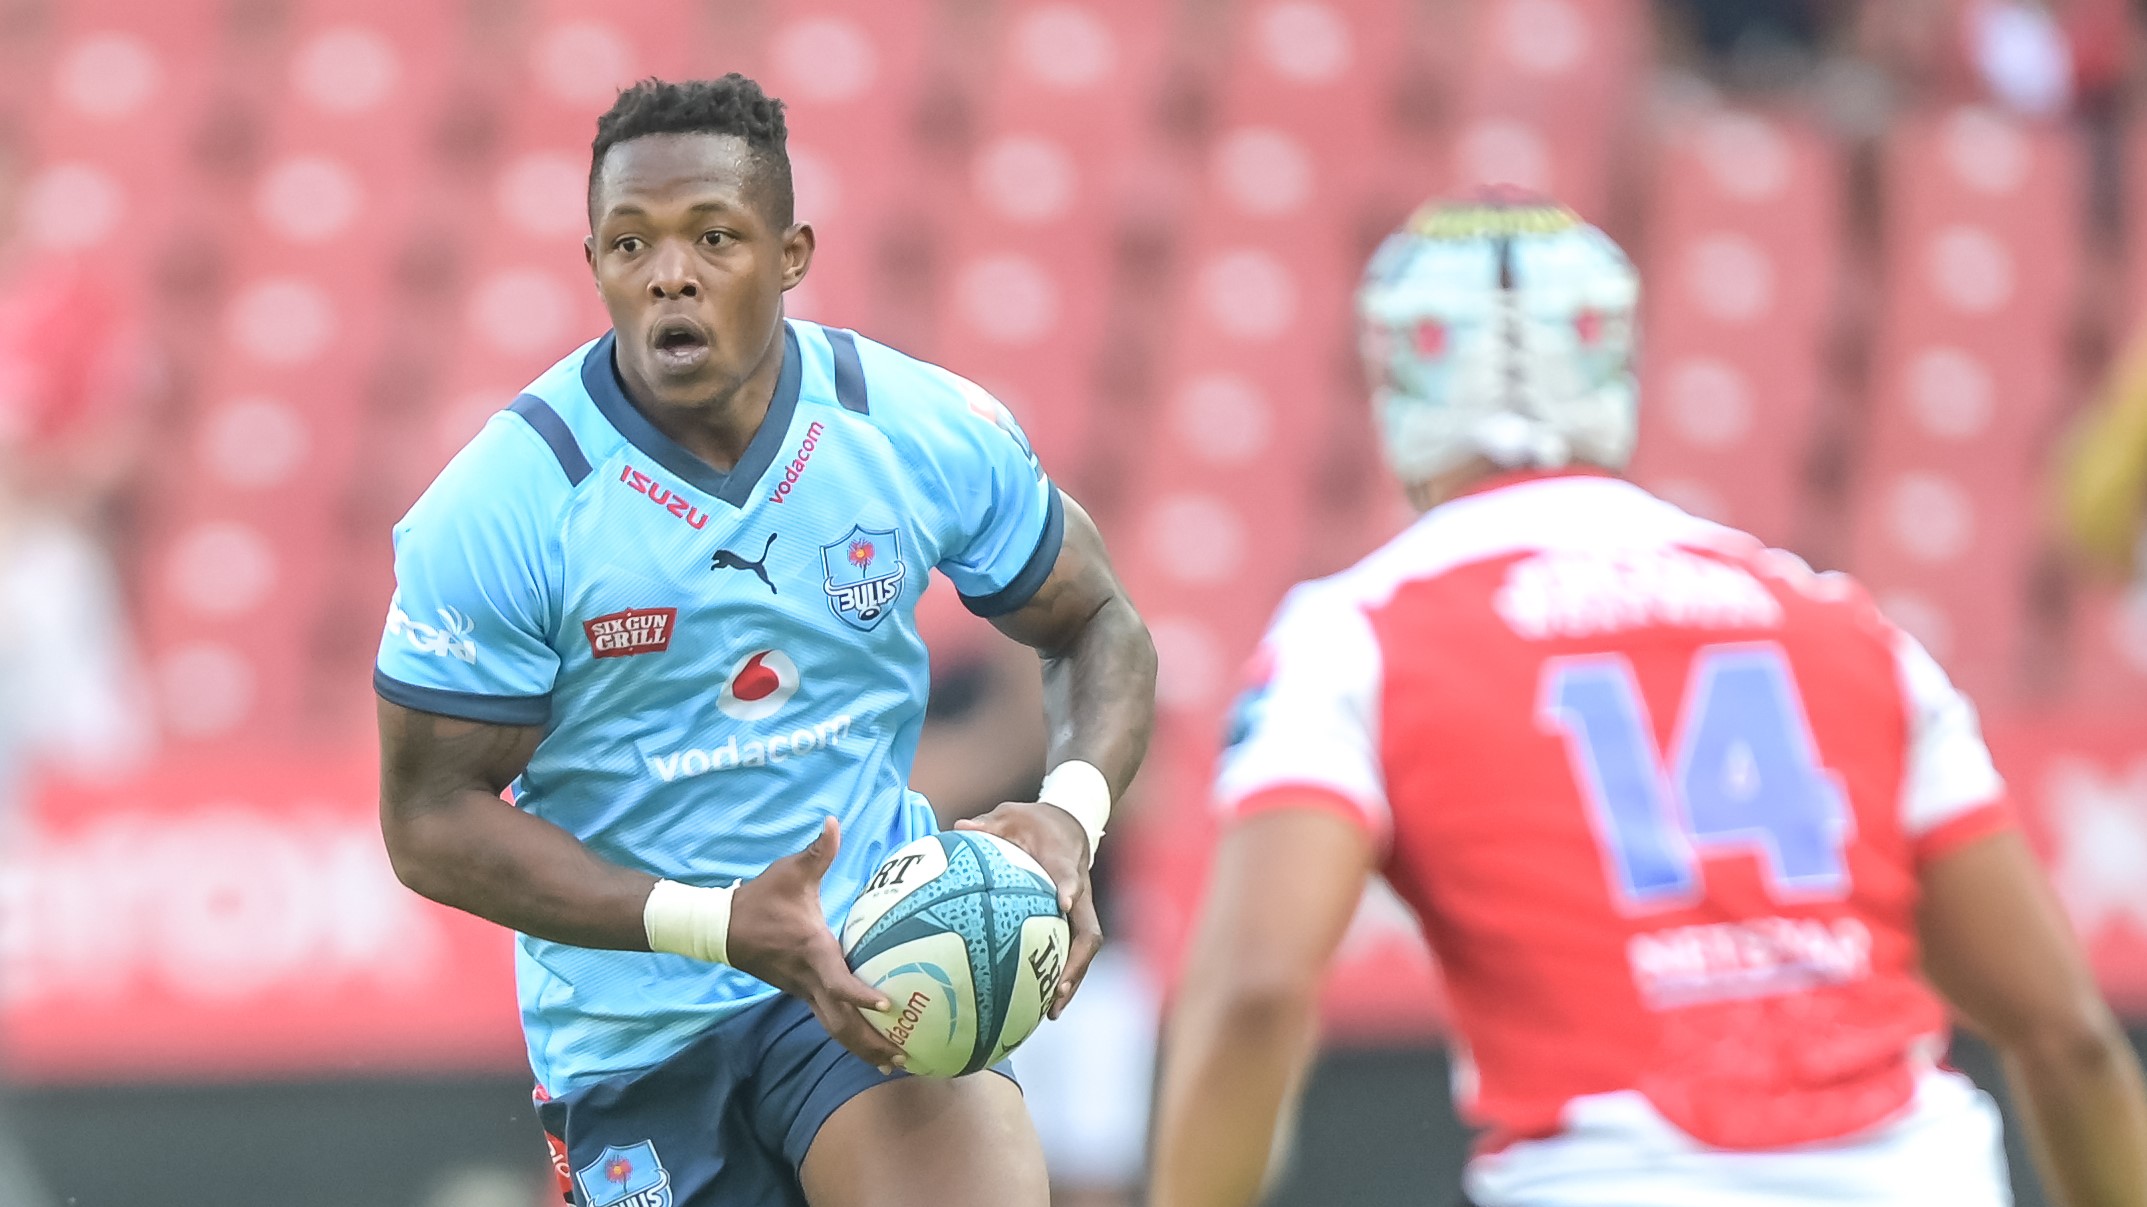 Sbu Nkosi of The Vodacom Bulls during the United Rugby Championship 2022/23 match between Emirates Lions and Vodacom Bulls held at Emirates Airline Park in Johannesburg, South Africa on 17 September 2022 Photo: ©Christiaan Kotze/BackpagePix